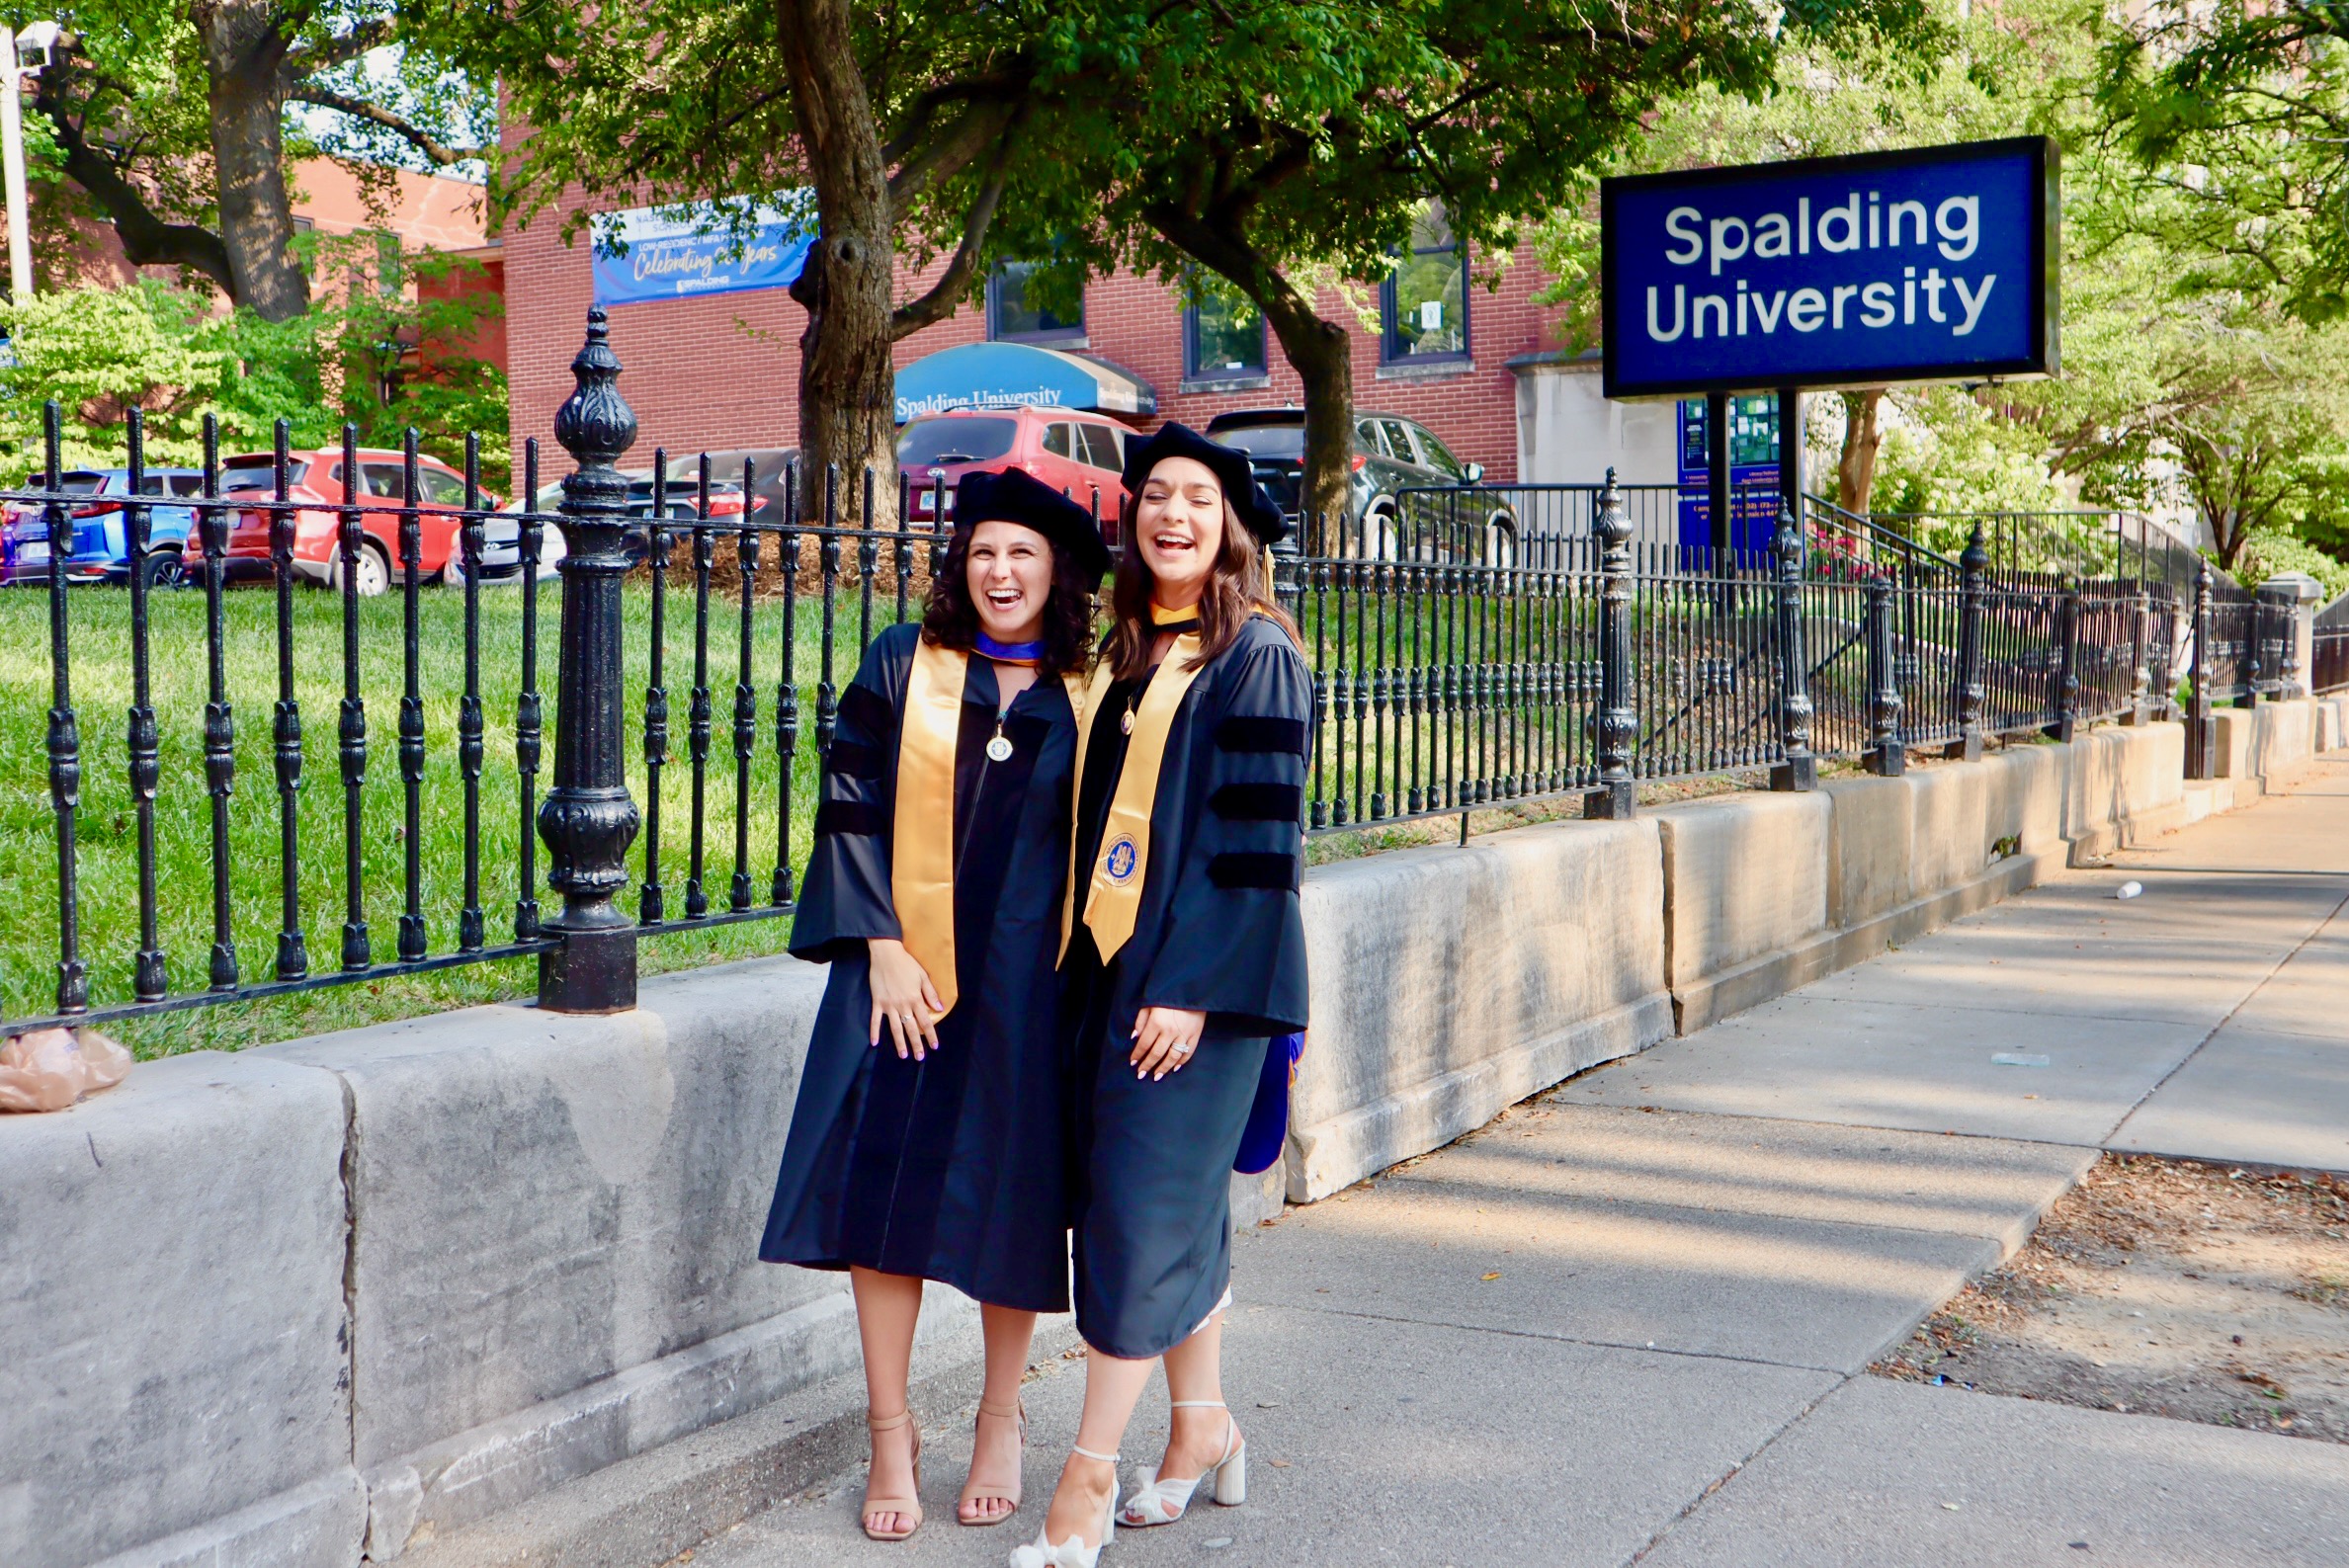 Two Spalding doctoral graduates posing for photo on the sidewalk